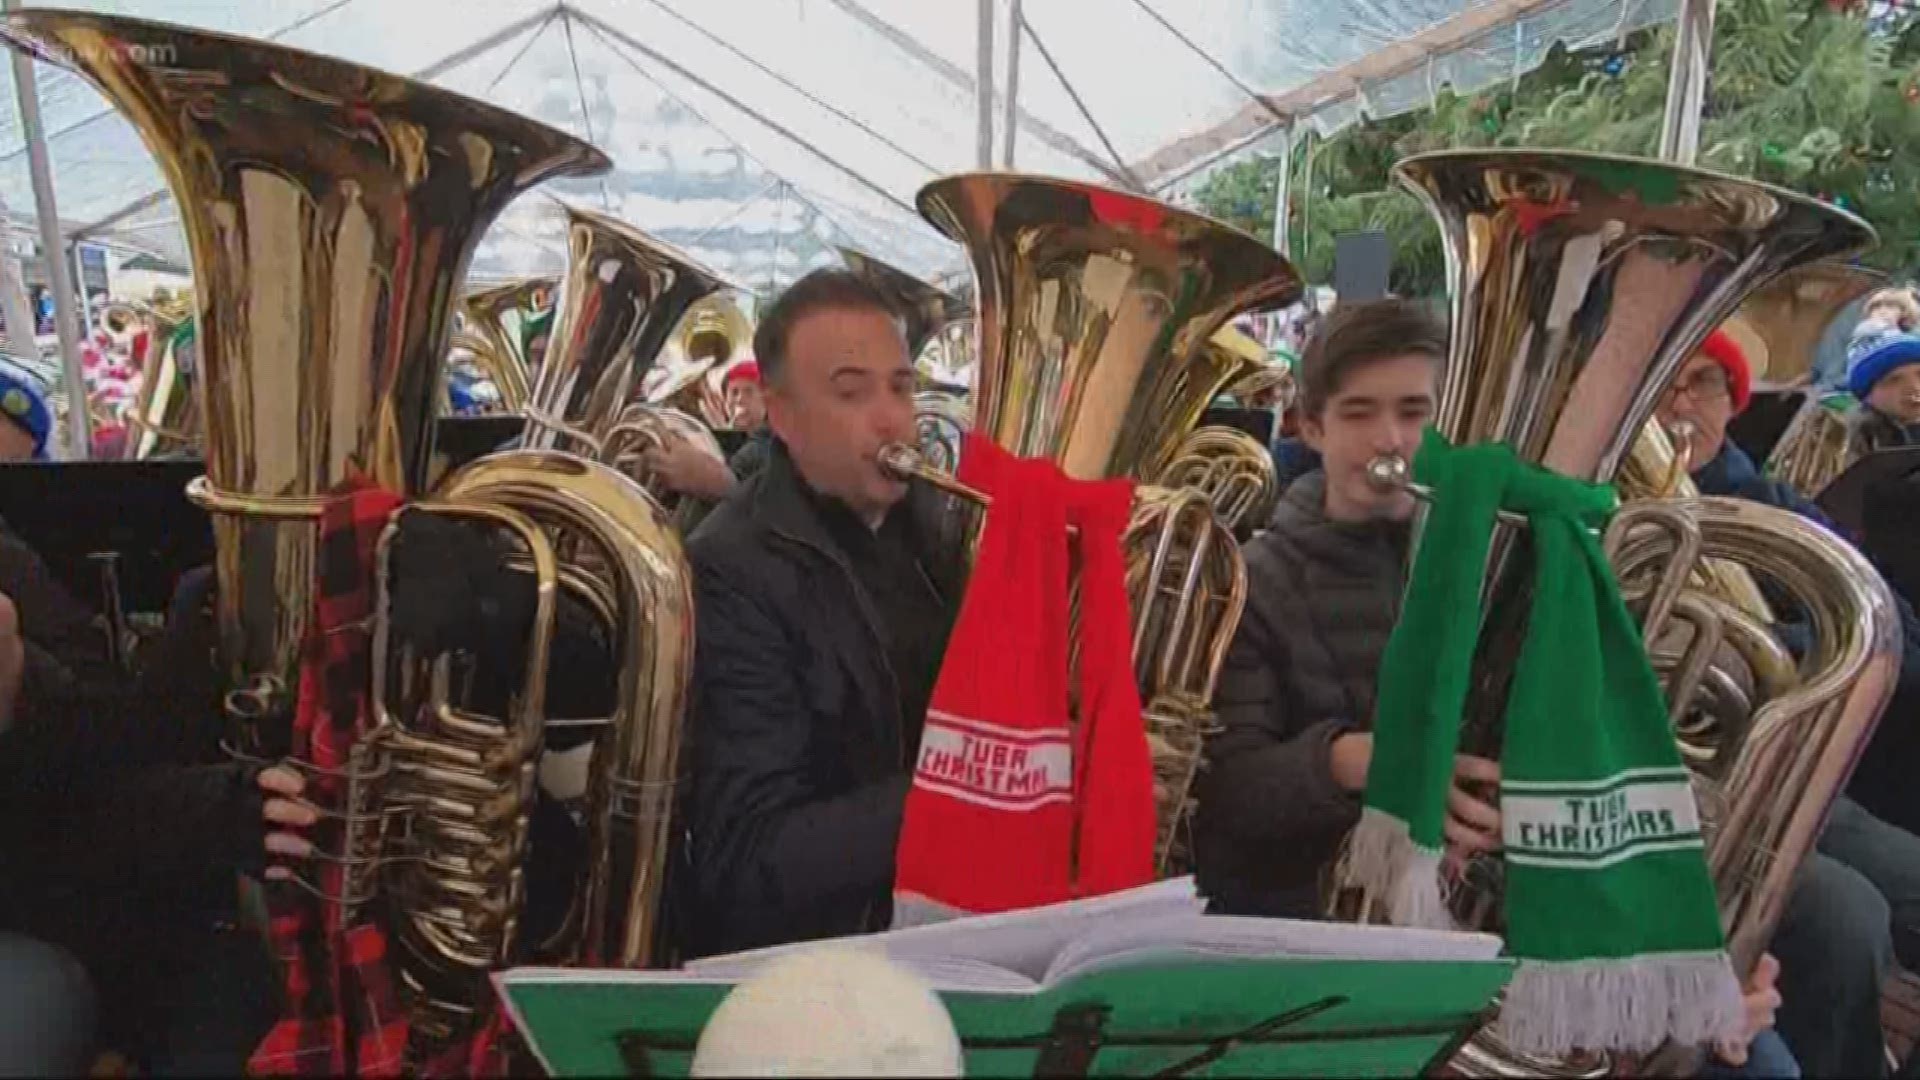 For the 29th year, this very Portland tradition took over Pioneer Courthouse Square as tuba players performed holiday favorites.